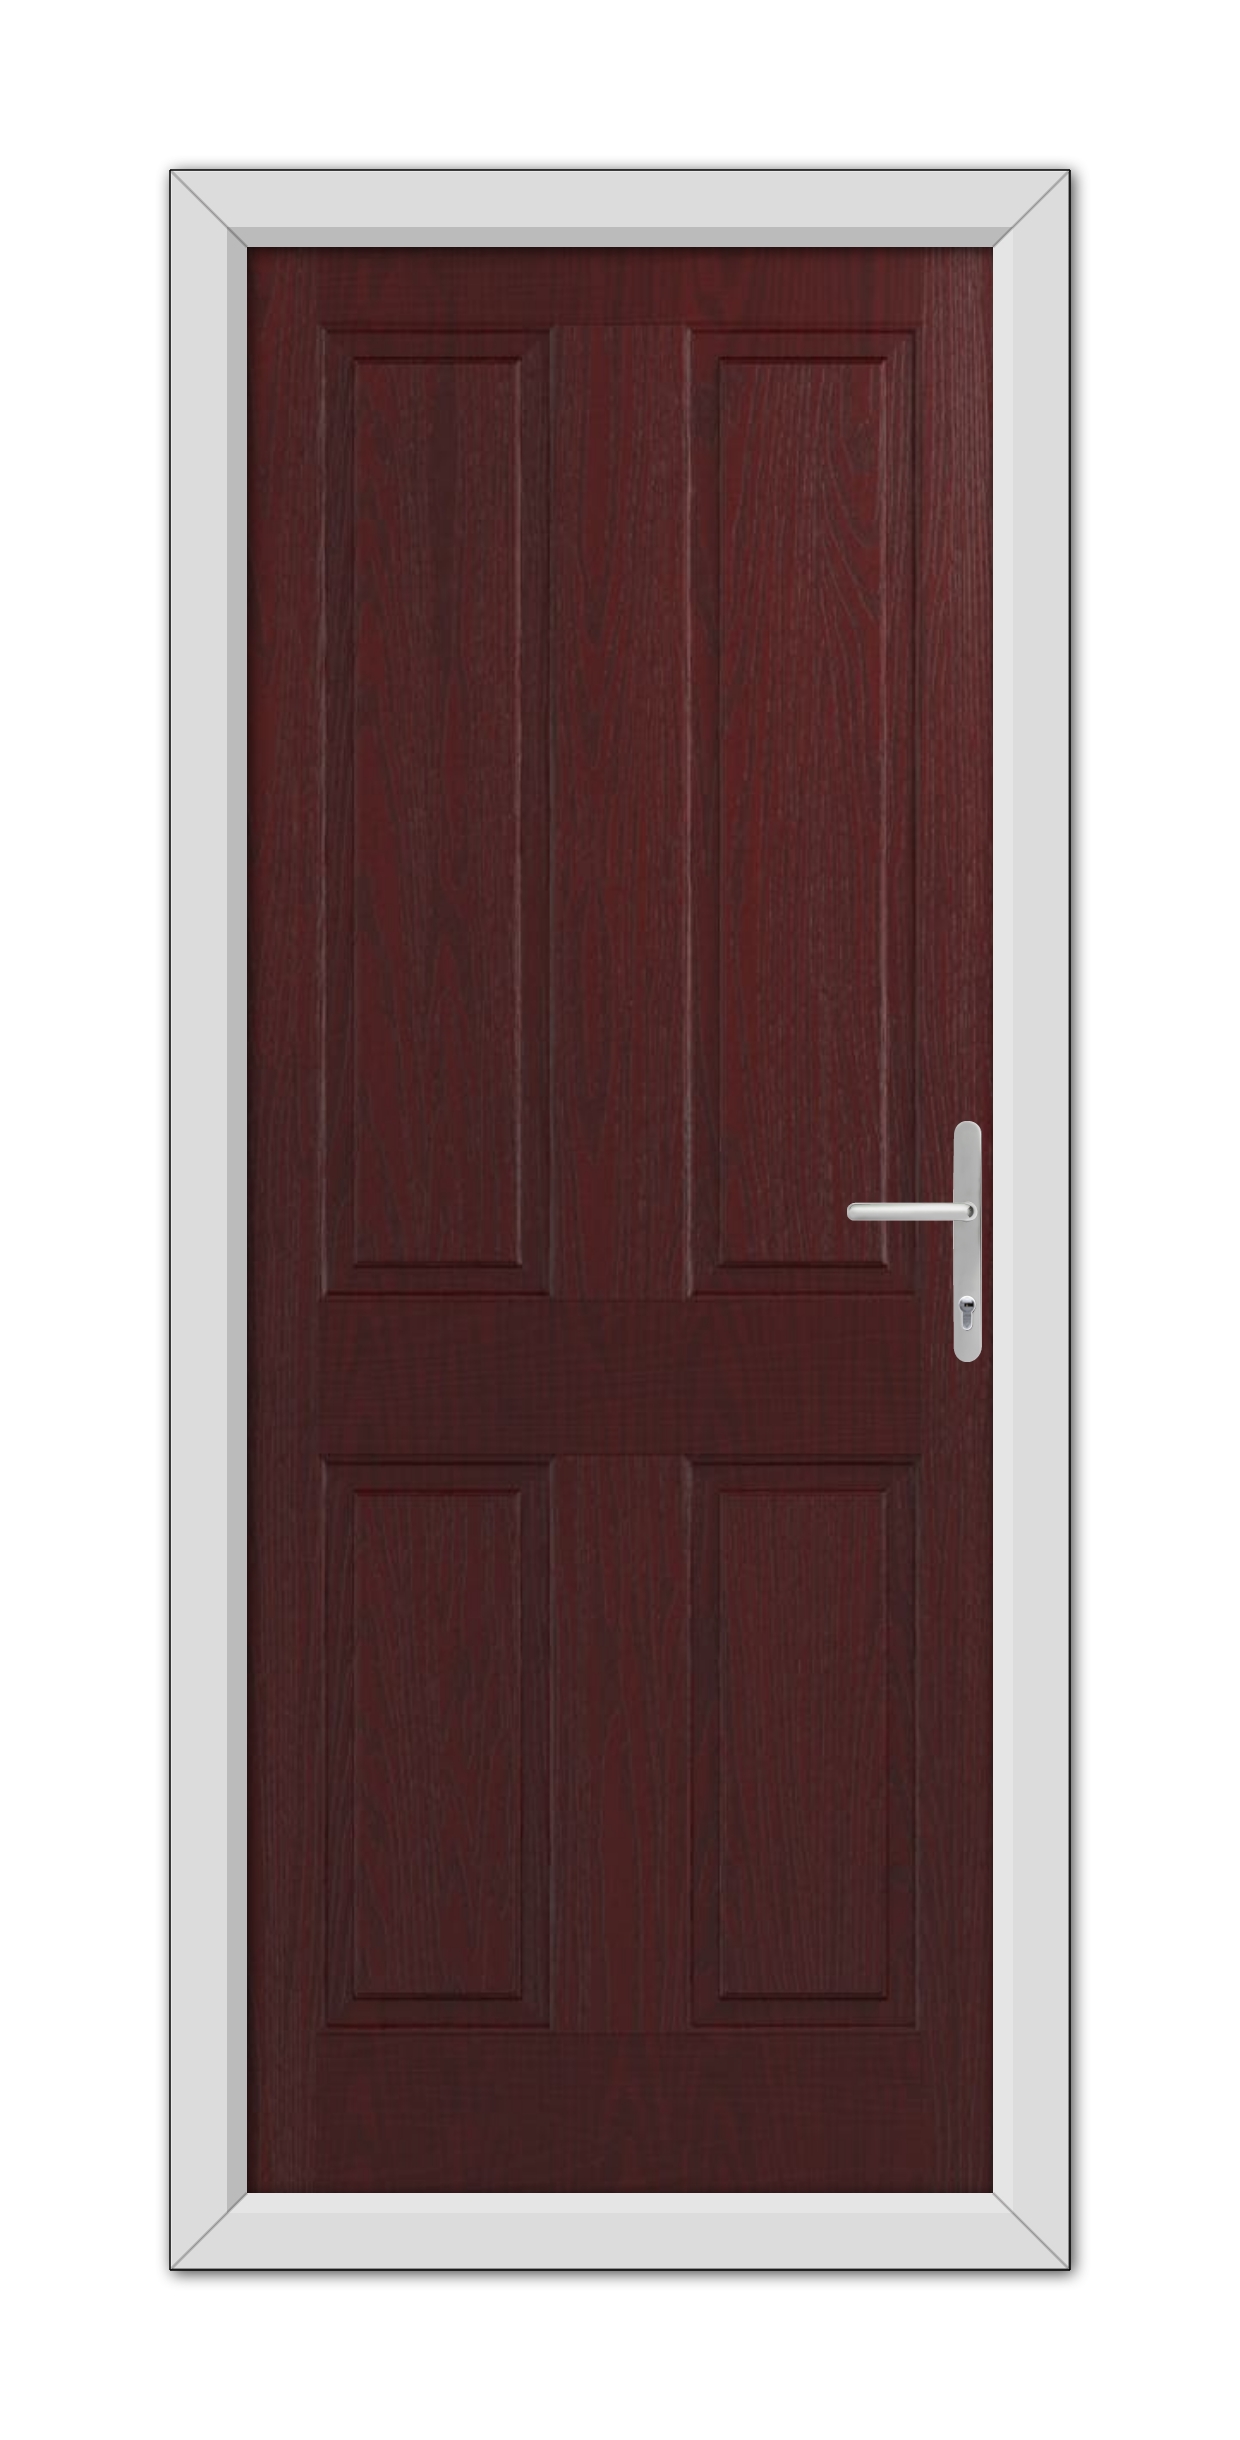 A closed Rosewood Whitmore Solid Composite Door 48mm Timber Core with a white frame and a metallic handle, set in a light gray wall.